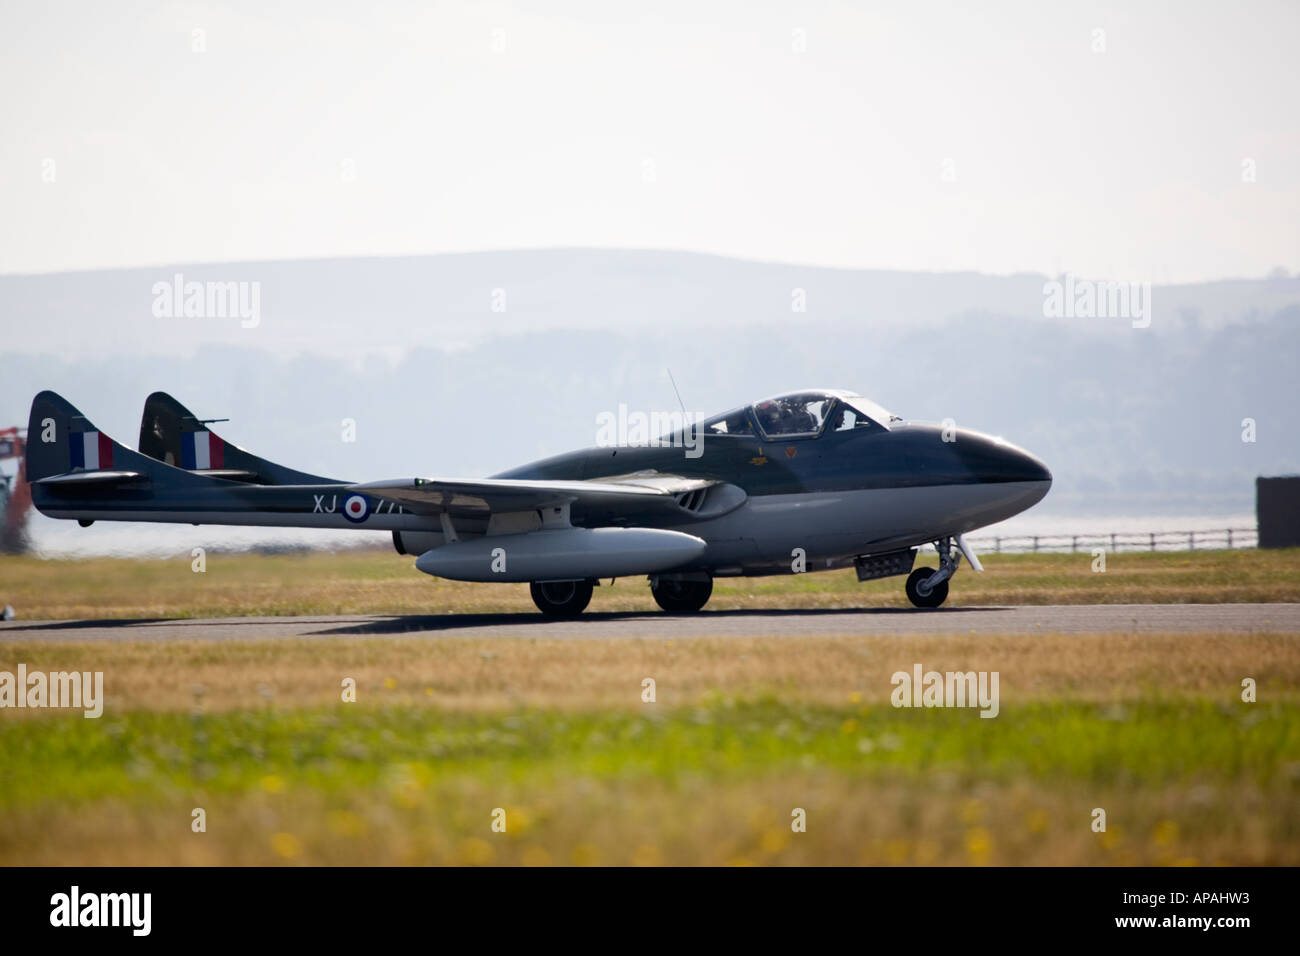 Vampire T11 / MK55 twin tail dual control jet fighter aircraft trainer on runway Stock Photo